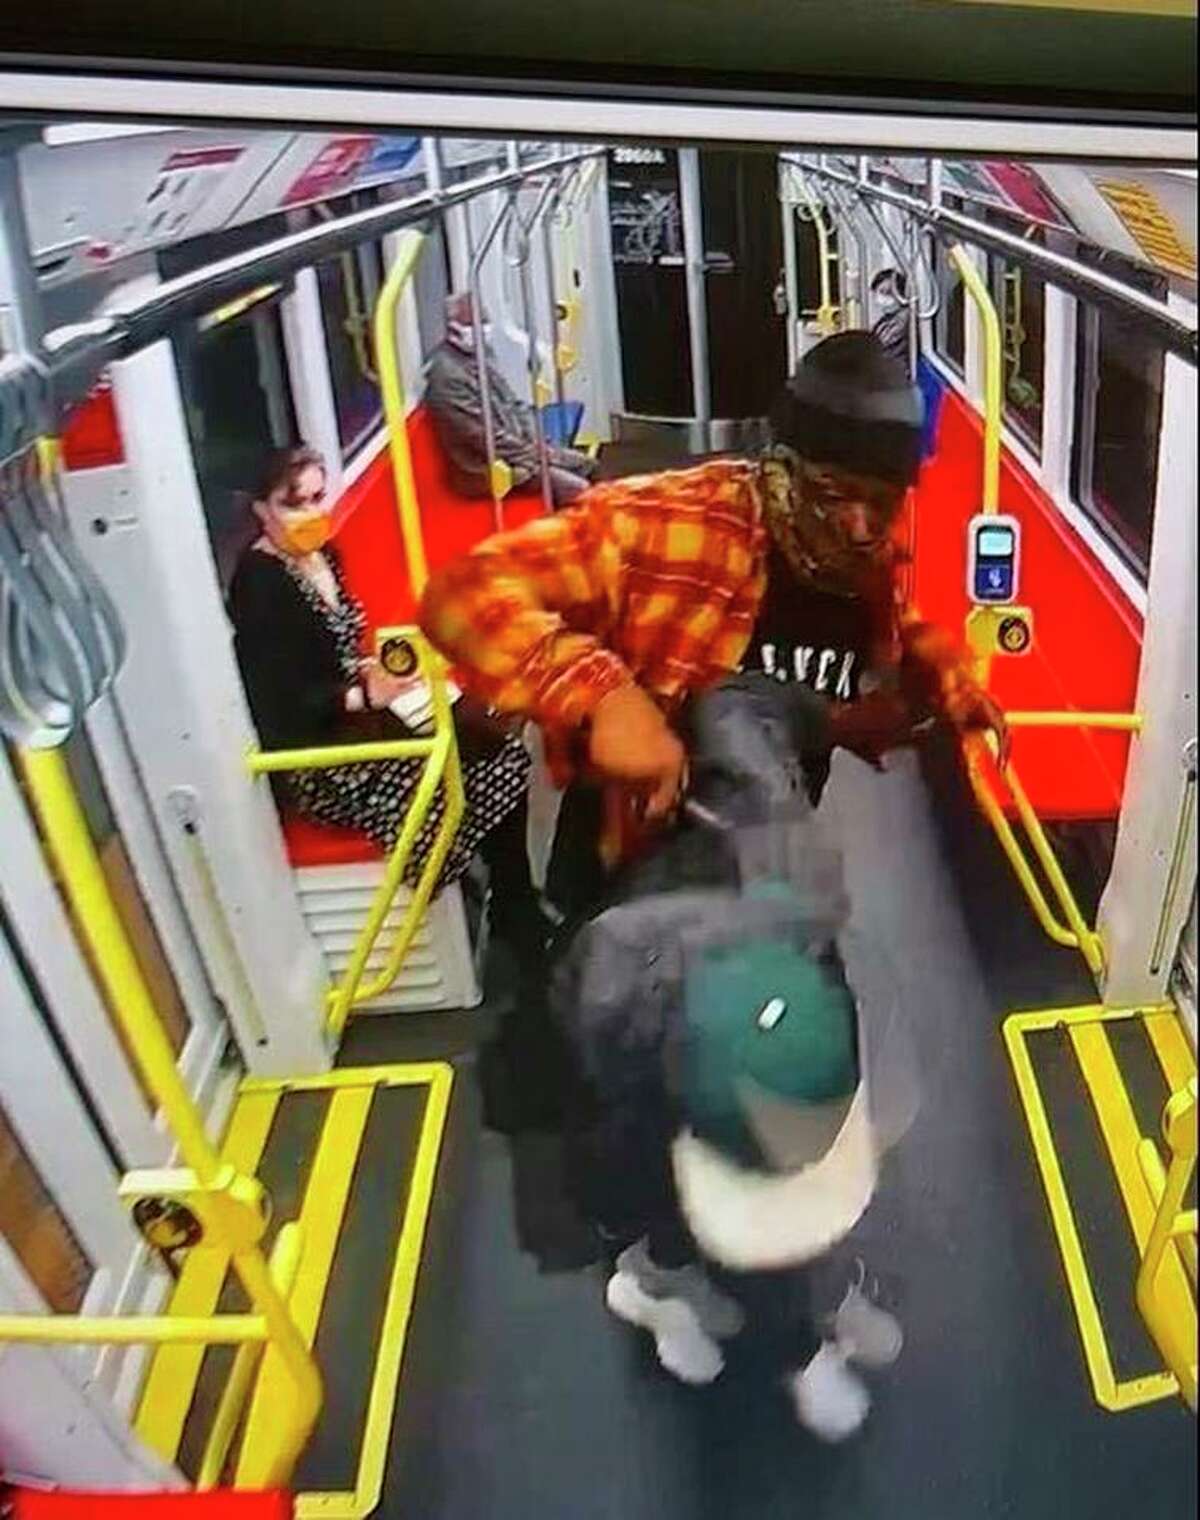 Nesta Bowen (in orange) attacks a man who appears to be Javon Green with what looks like a knife on a Muni train in a still from surveillance video.